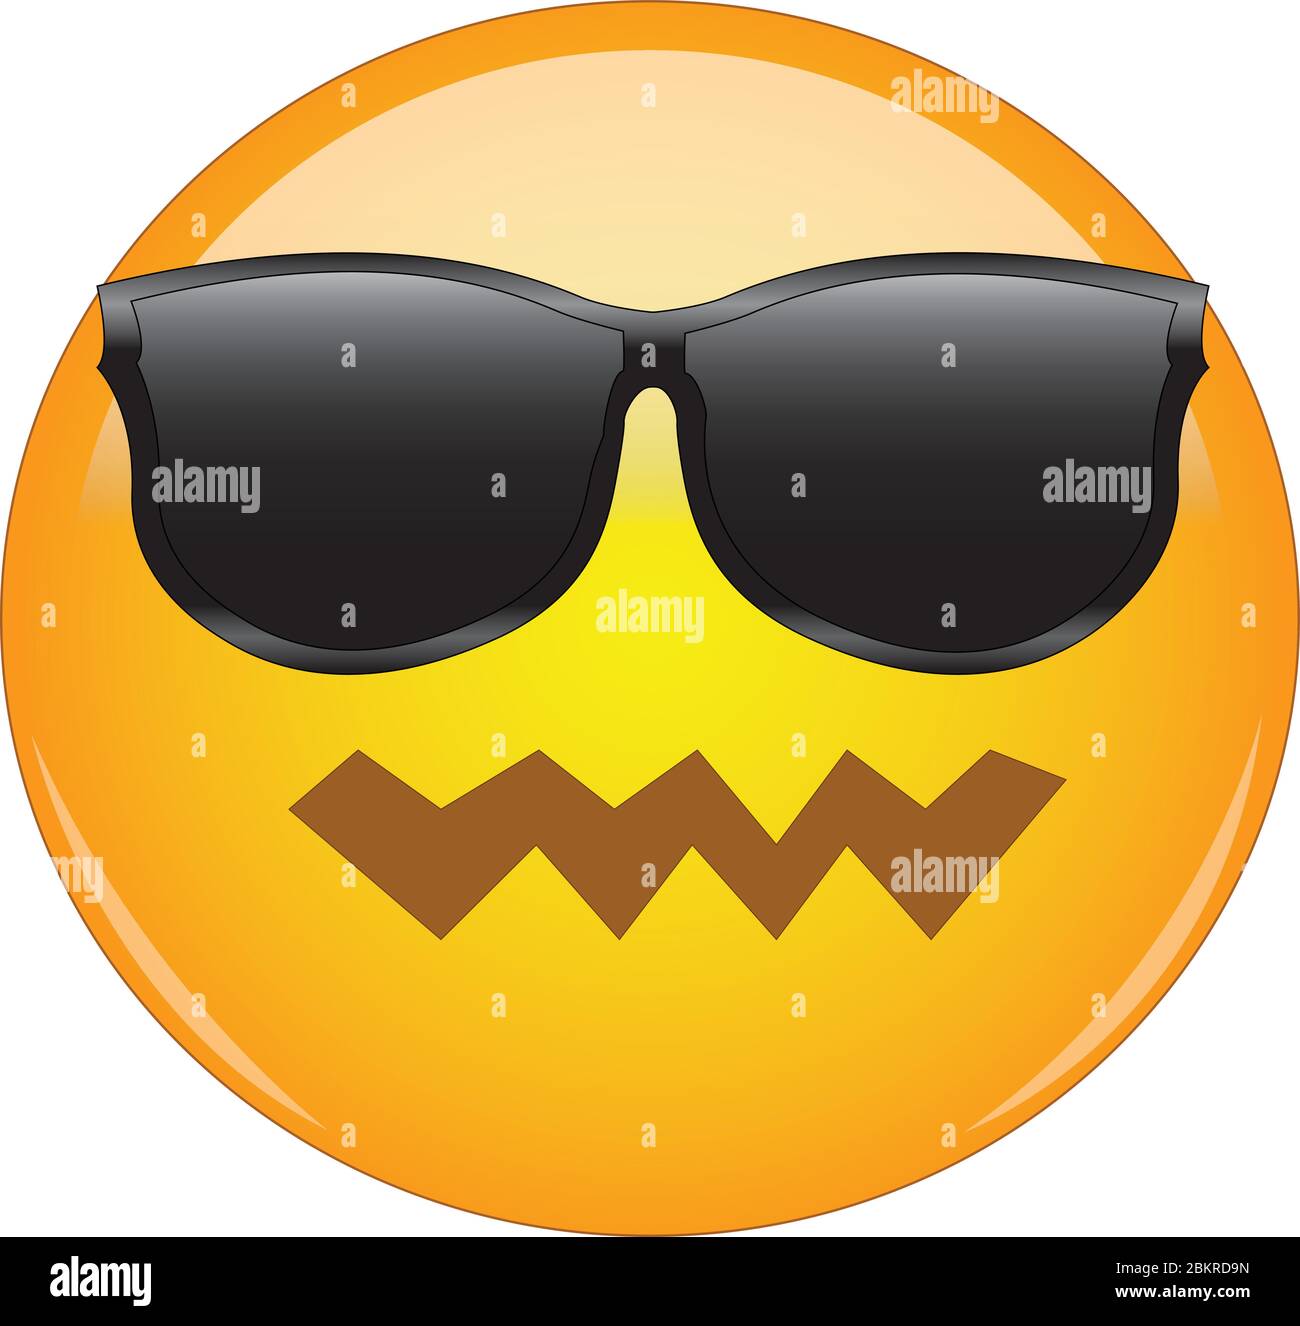 Cool yet confused emoji. Yellow face emoticon with pwnd face expression and sunglasses looking awesome. Expression of being awesome, cool, yet confuse Stock Vector